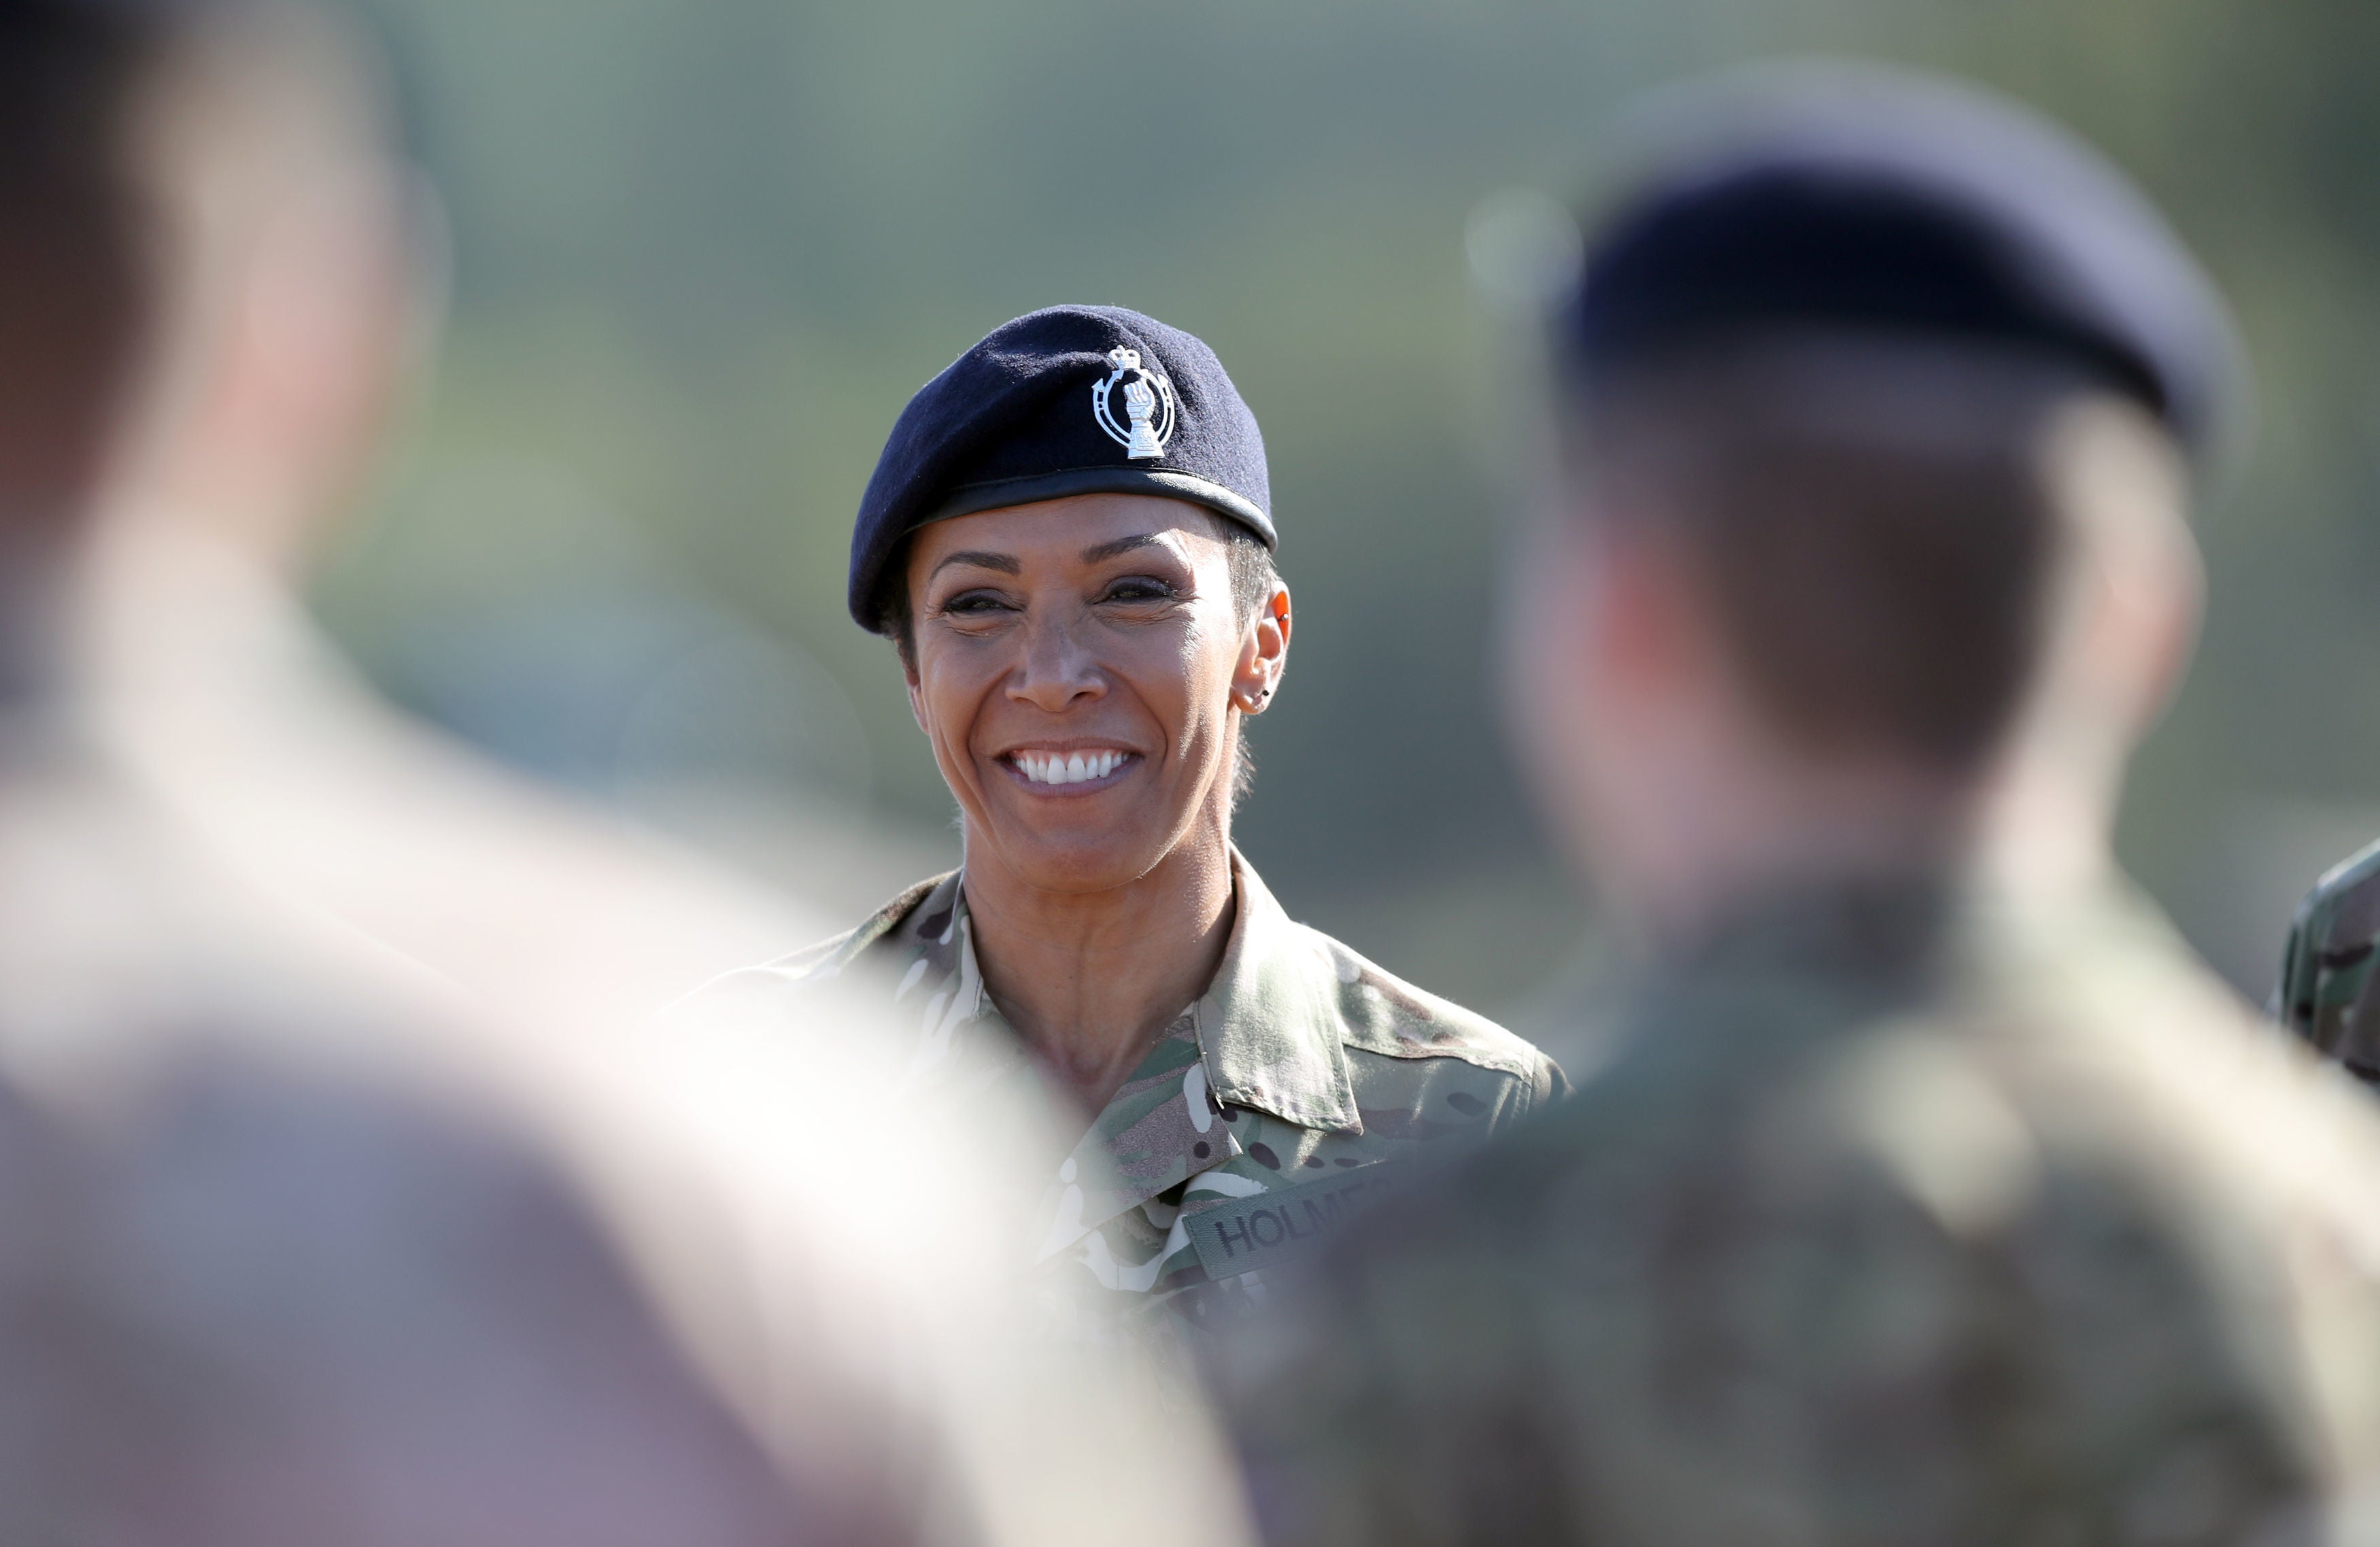 Dame Kelly admits to secret relationships with women while in the army